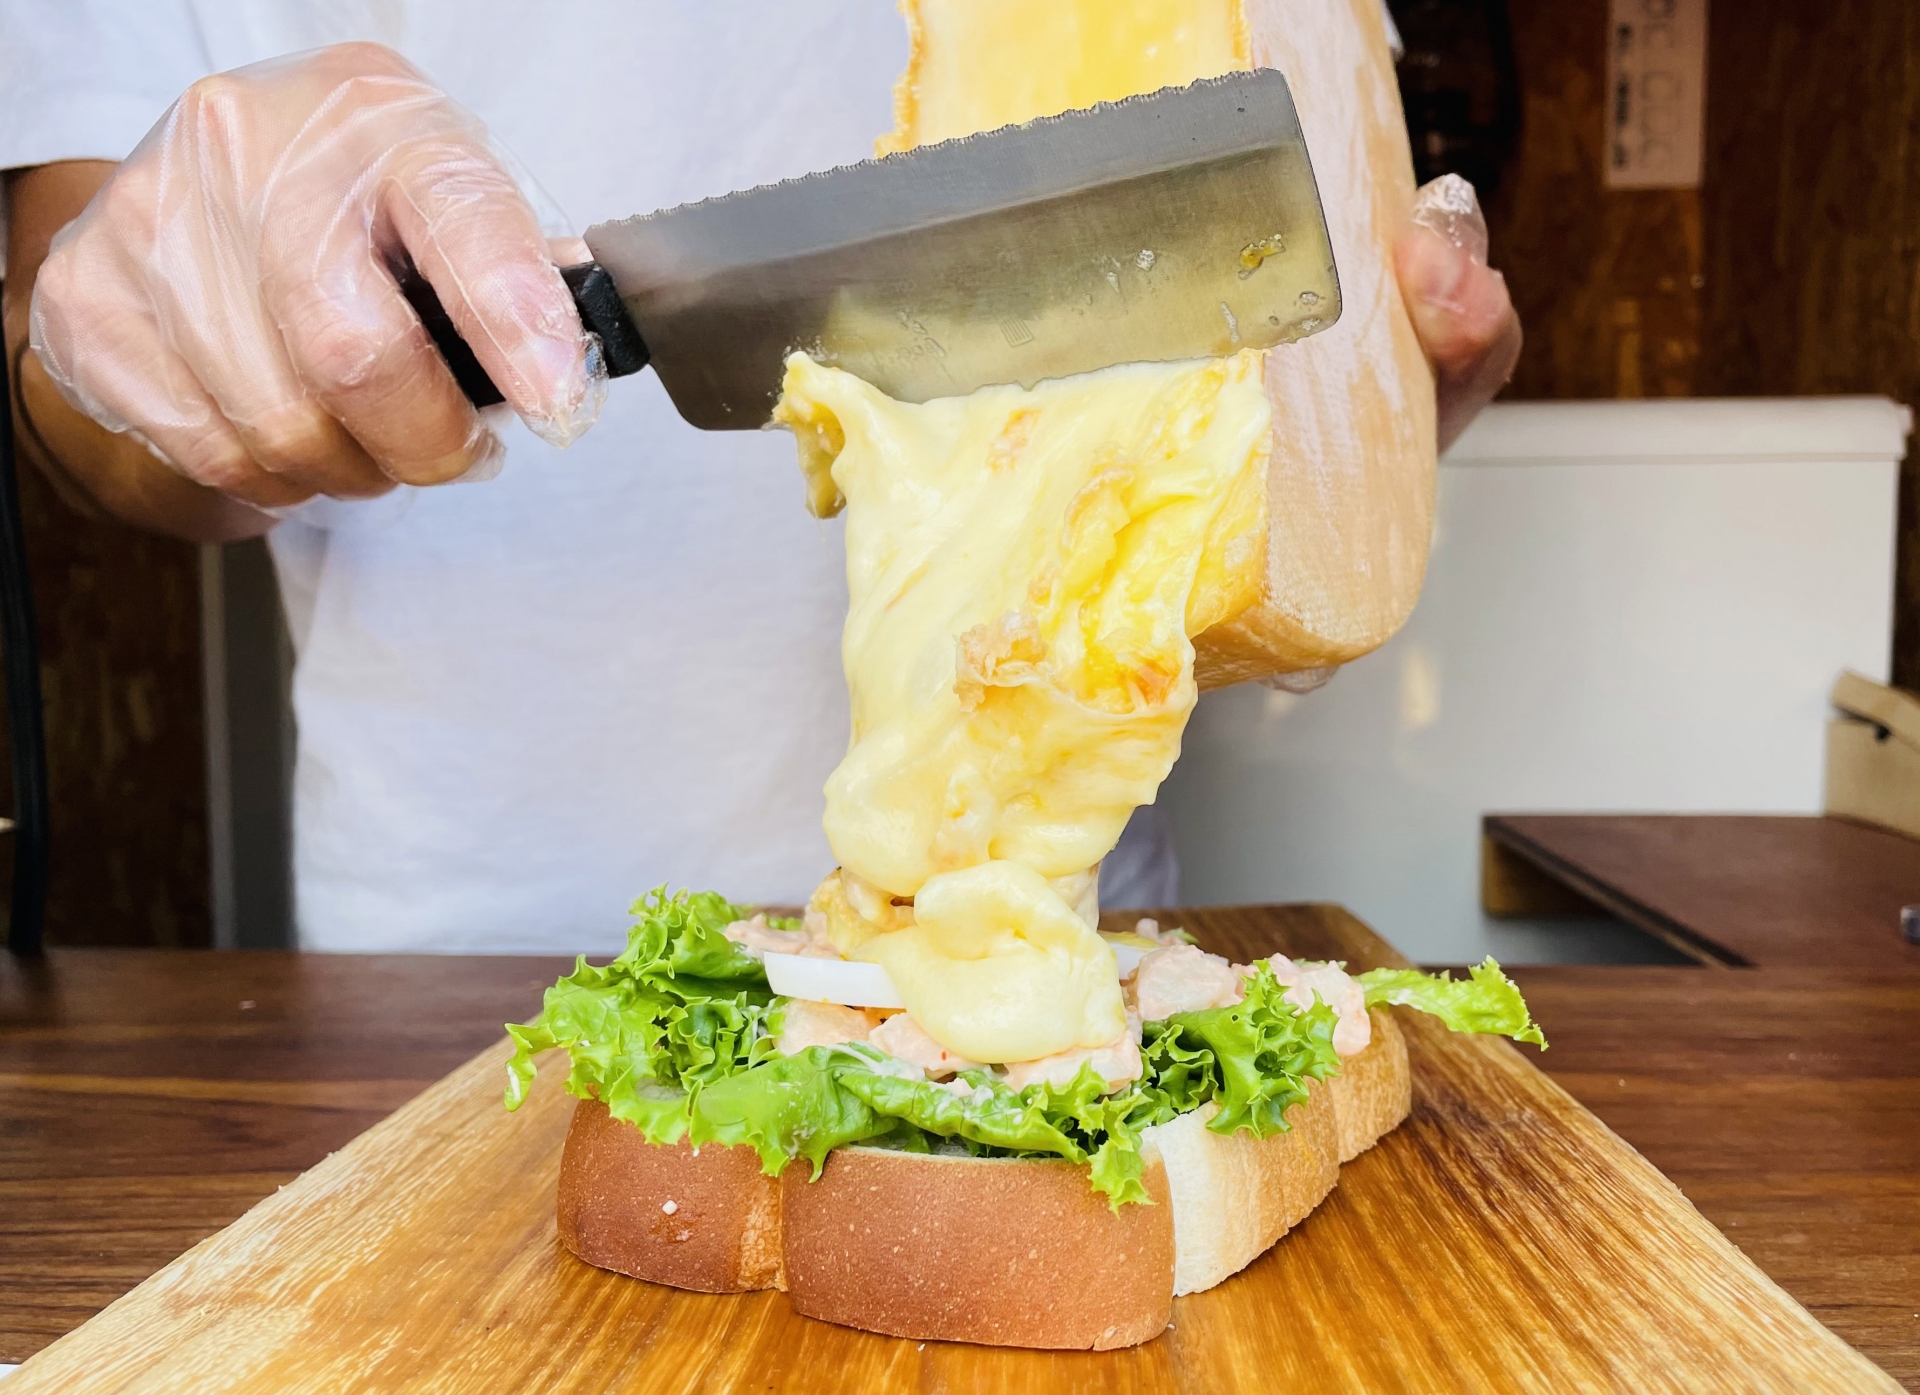 A lot of raclette cheese is poured on an open sandwich.